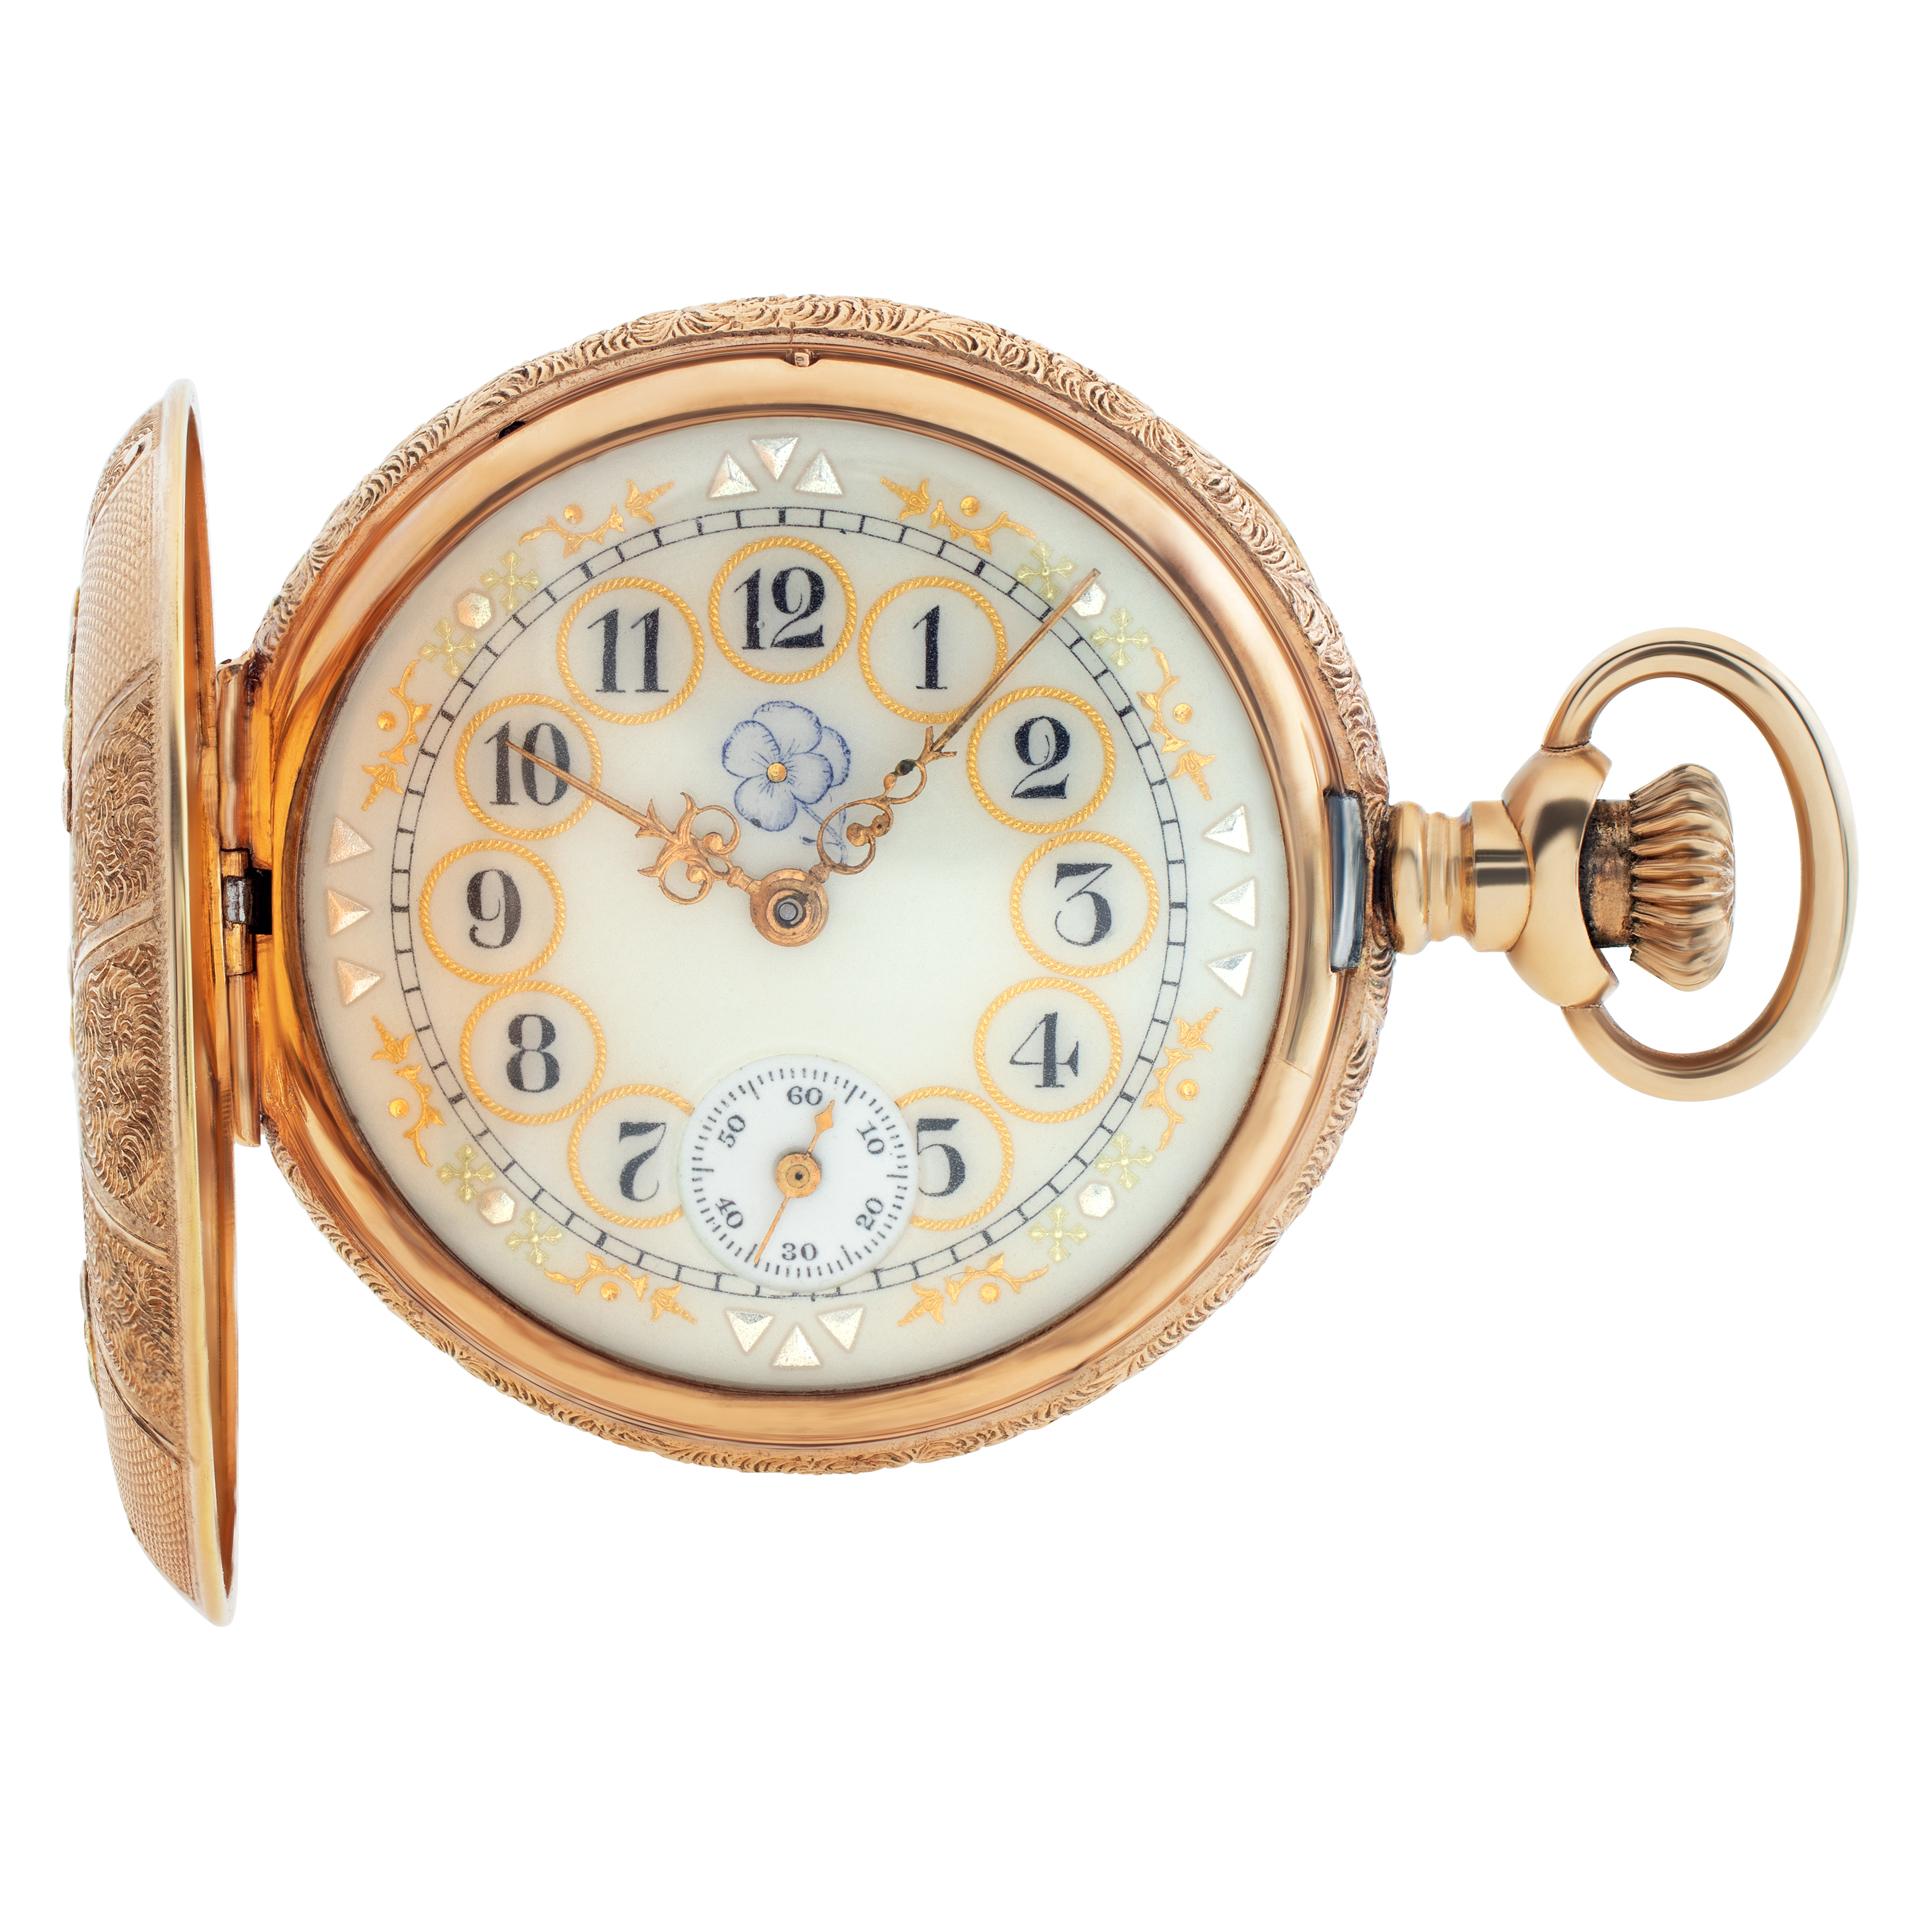 Elgin 14k Multi-Colored Gold (Rose, Yellow, White and Green) Pocket watch with highly engraved multi colored buttercups and roses with fancy multy colored dial and fancy hands. Manual. 34 mm case size. Circa 1900s. Fine Pre-owned Elgin Watch.